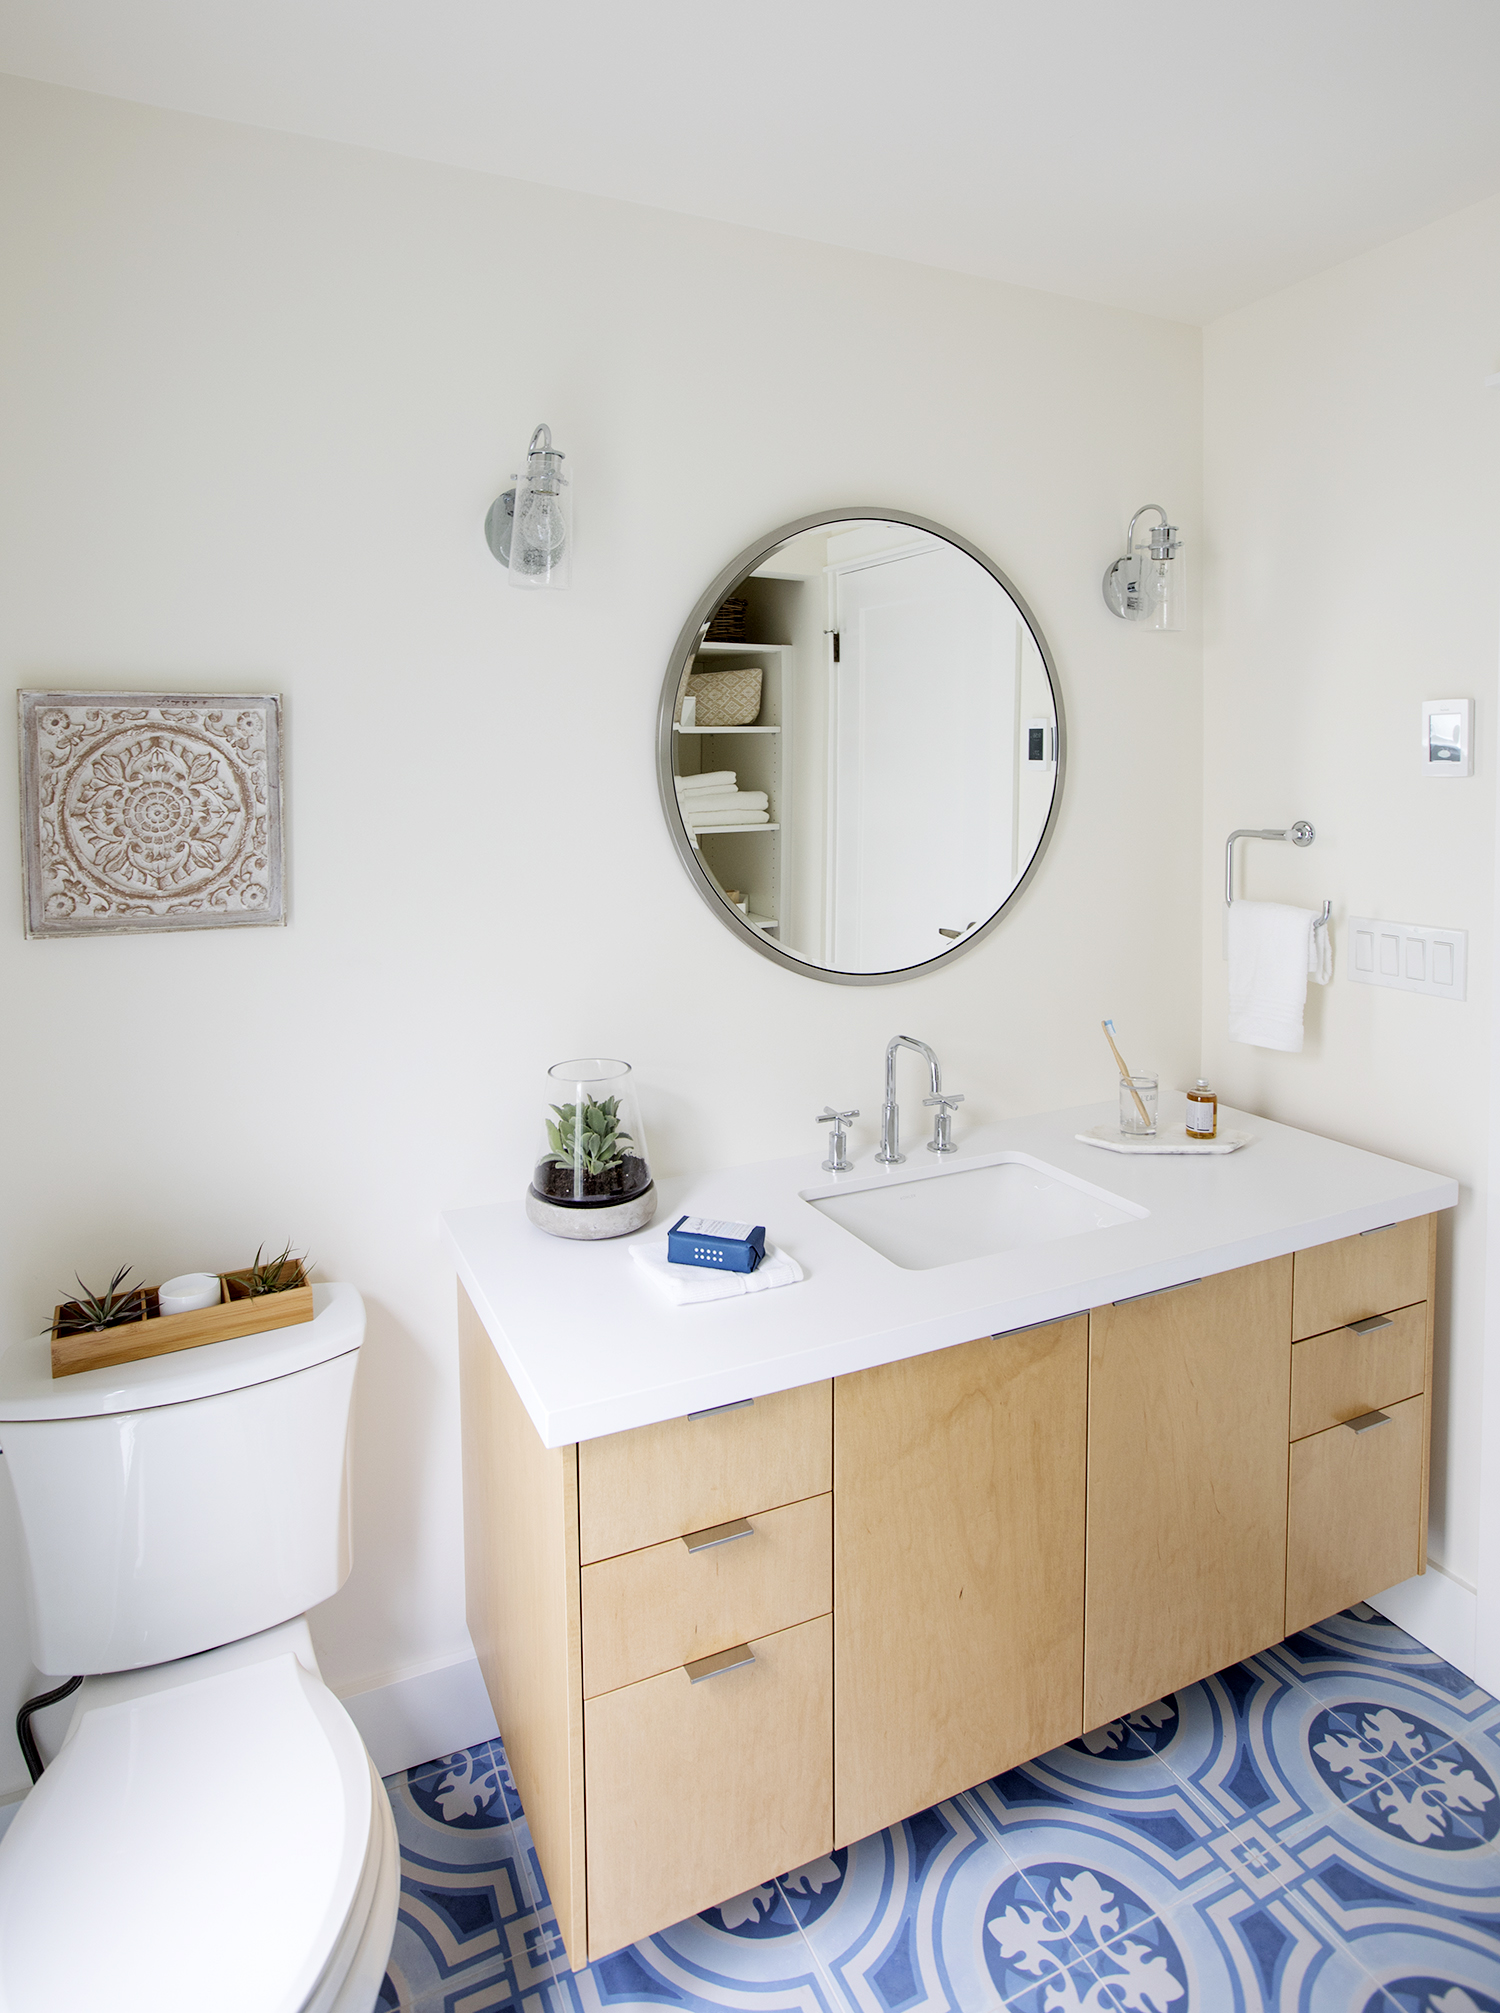 A floating vanity makes the room feel more open and offers plenty of storage options.